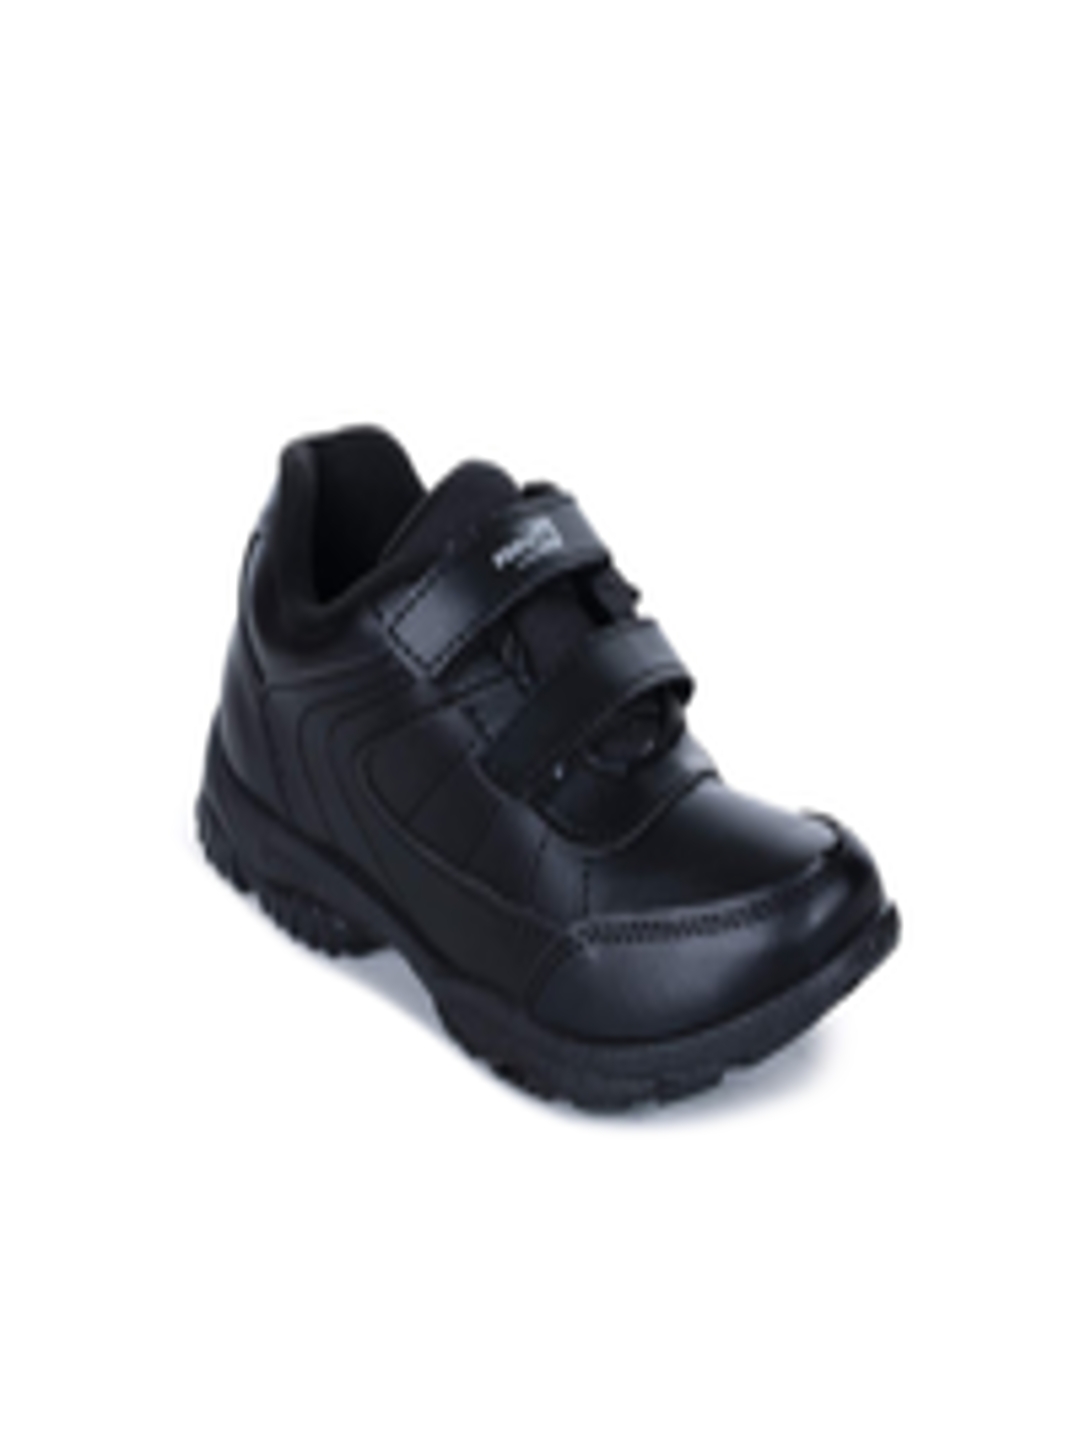 Buy Liberty Kids Black School Shoes - Casual Shoes for Unisex Kids ...